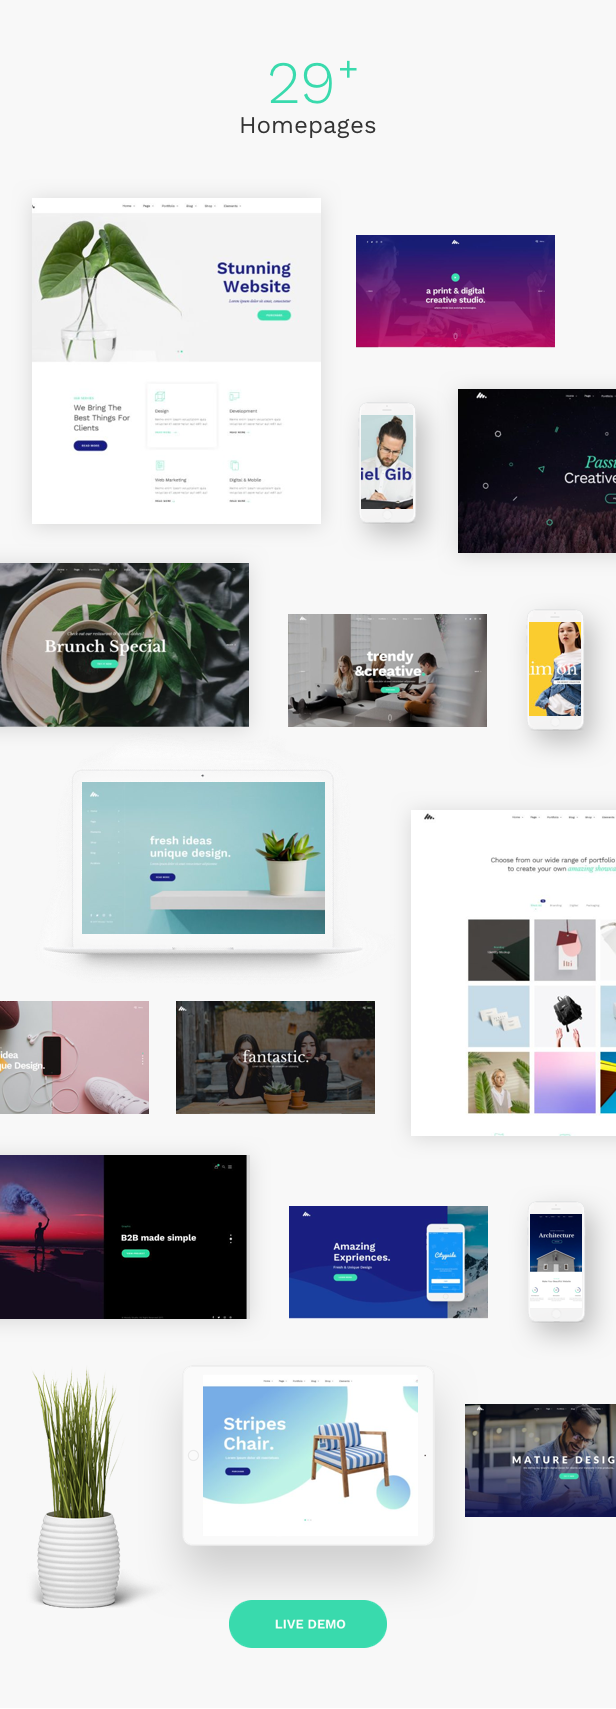 Corporate Business Agency WordPress Theme - 29+ Homepages